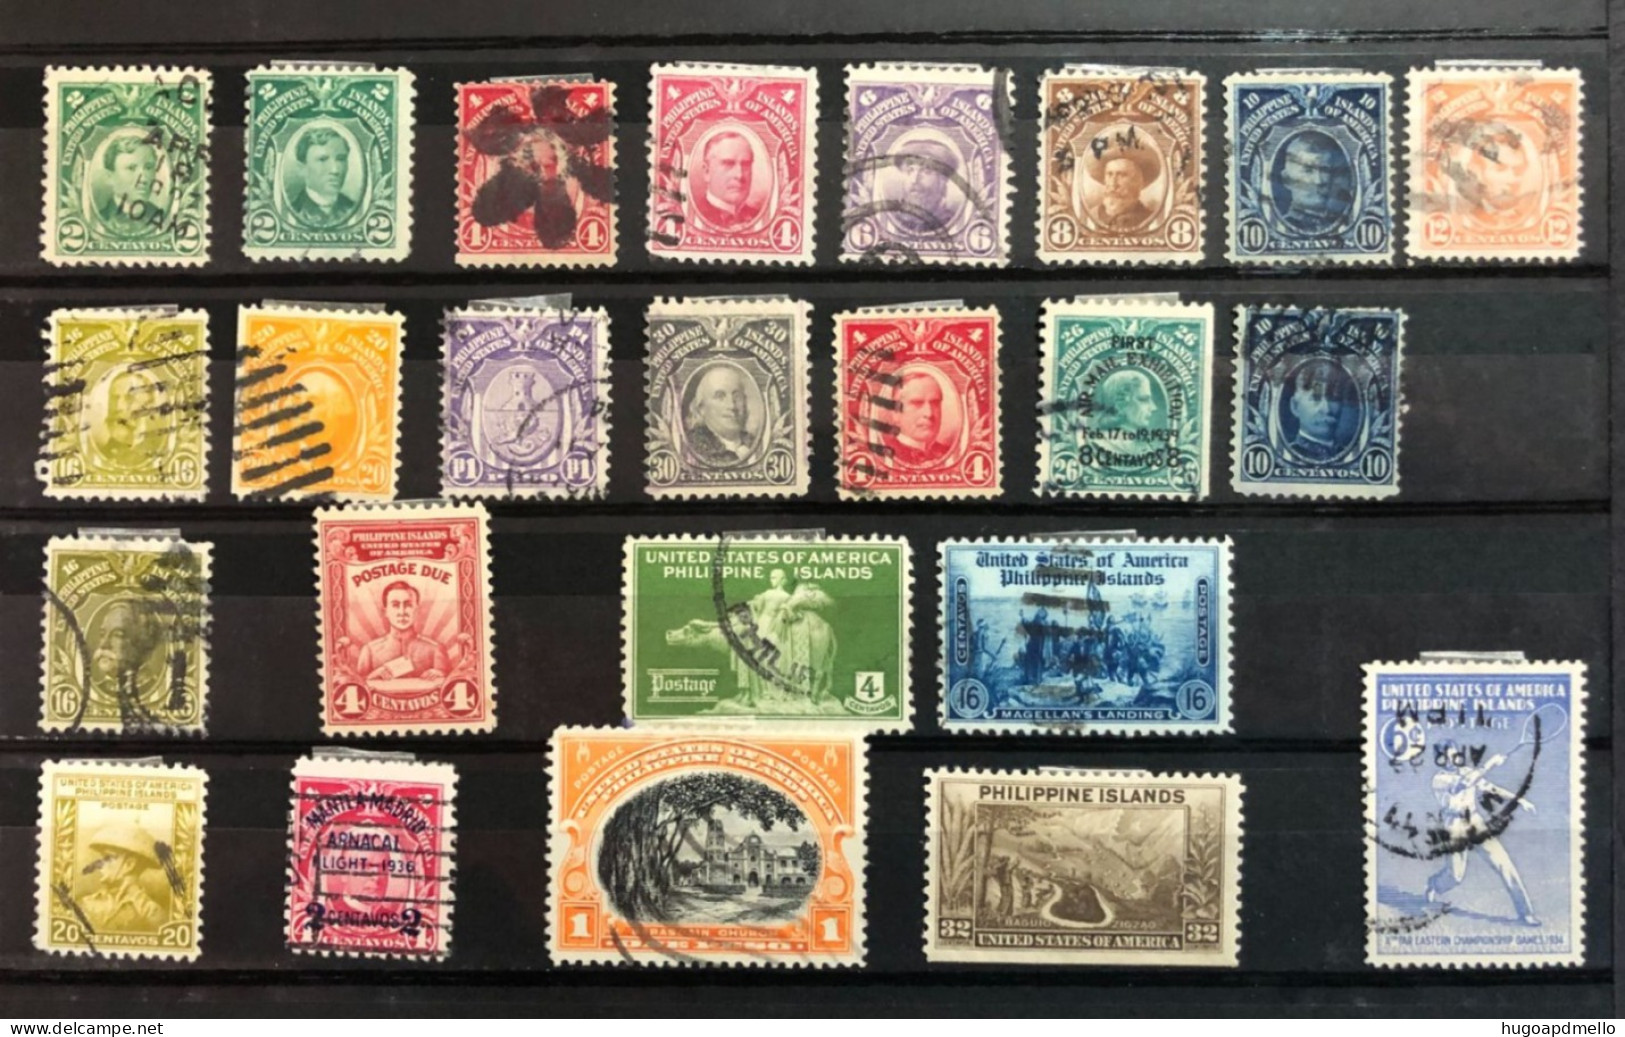 PHILIPPINES Islands (United States Possession), Lot Composed Of 24 Old Stamps. *MH And USED - Filippine